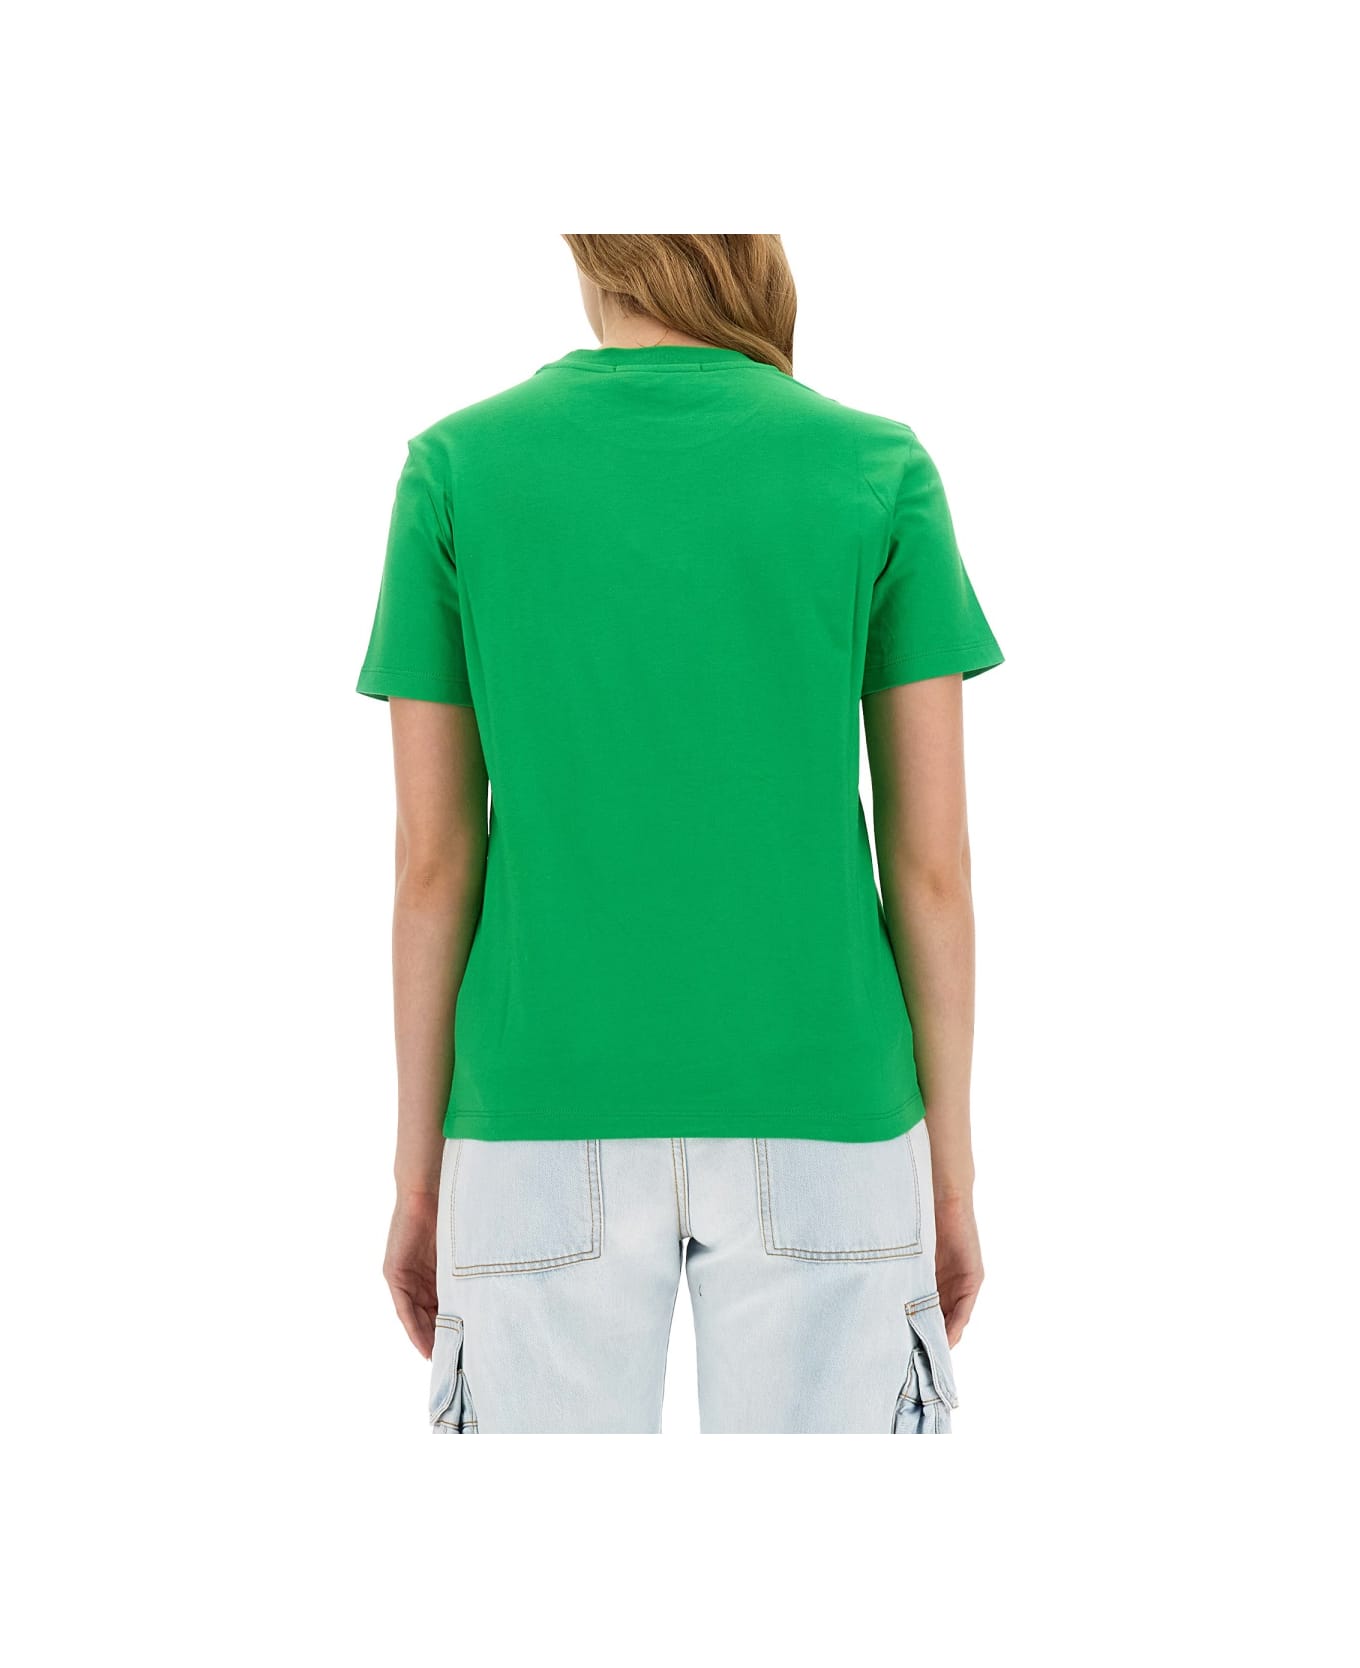 MSGM T-shirt With Logo - GREEN Tシャツ